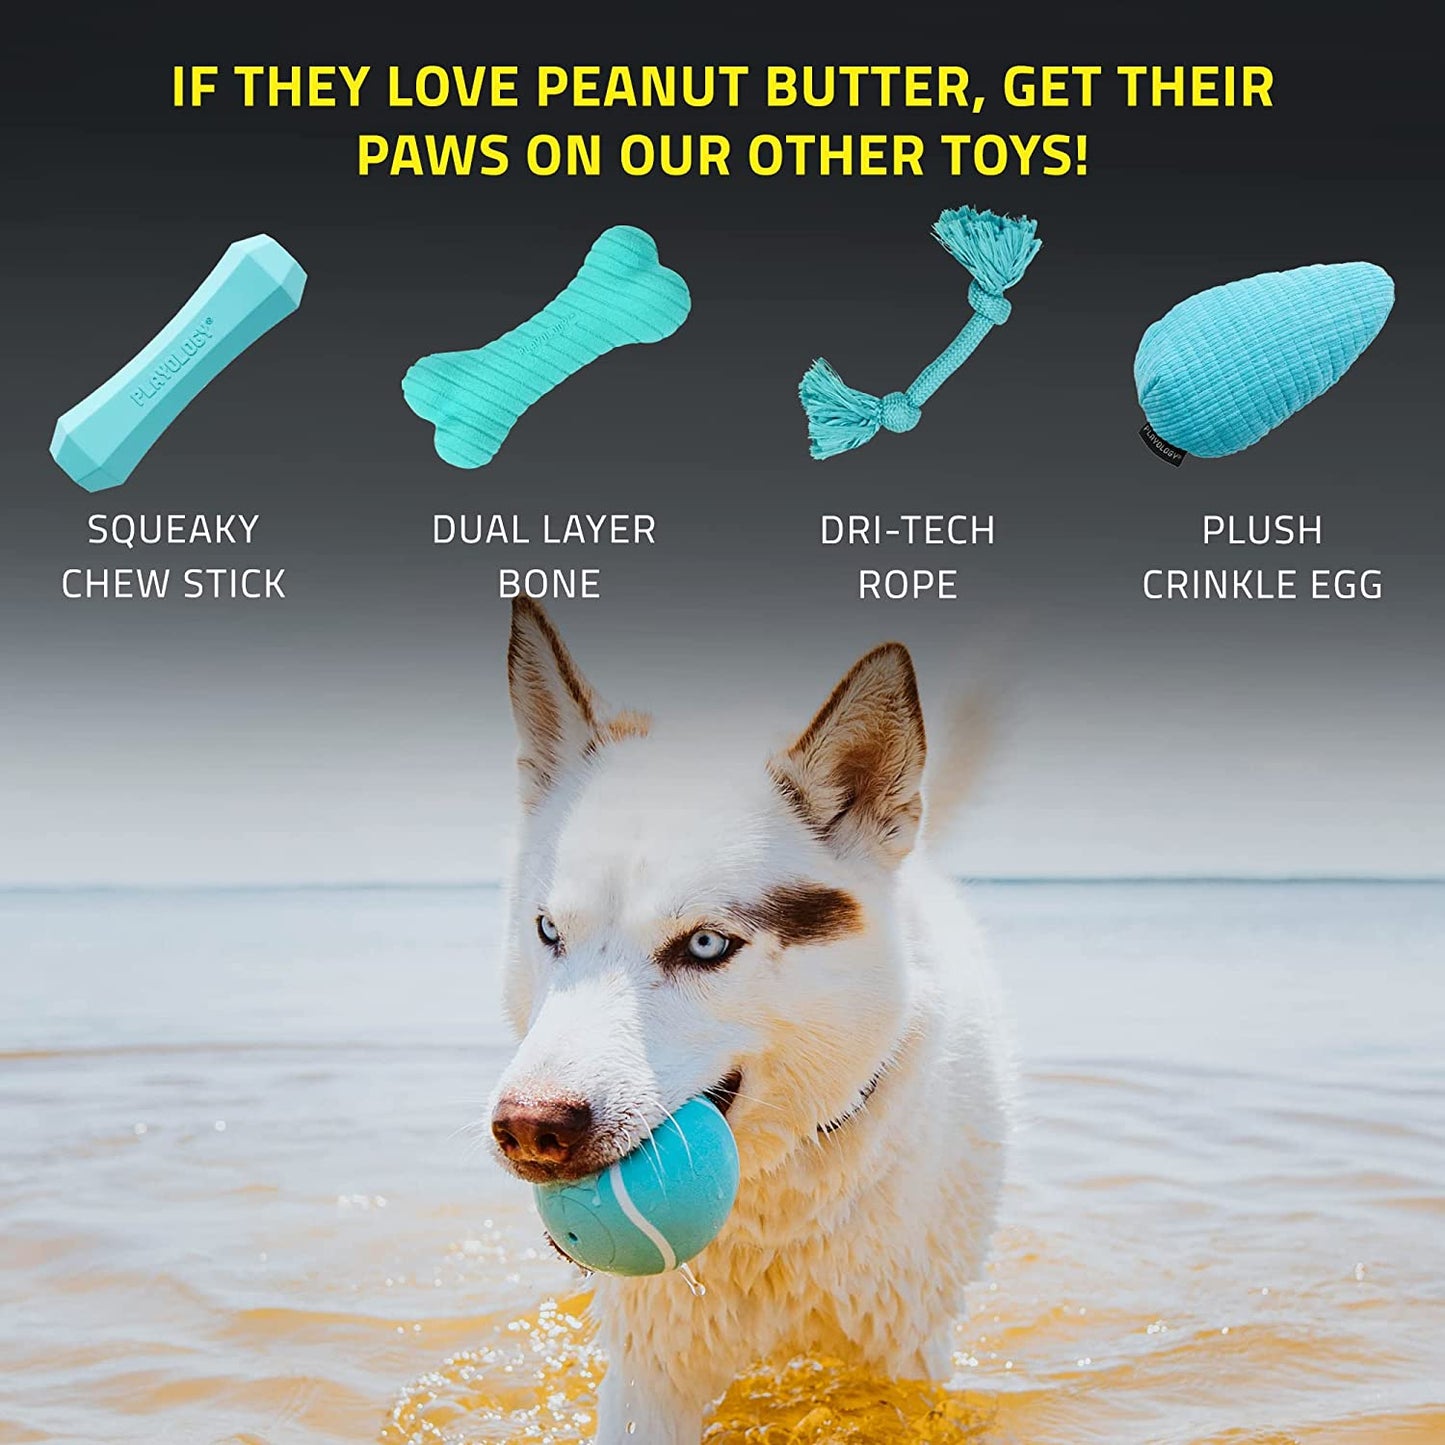 New Dog Balls for Medium and Large Dogs (10lbs & Up) - Dog Ball for Aggressive Chewers - Squeaky Toy, Engaging All-Natural Peanut Butter Scented - Non-Toxic Rubber Dog Ball Toys